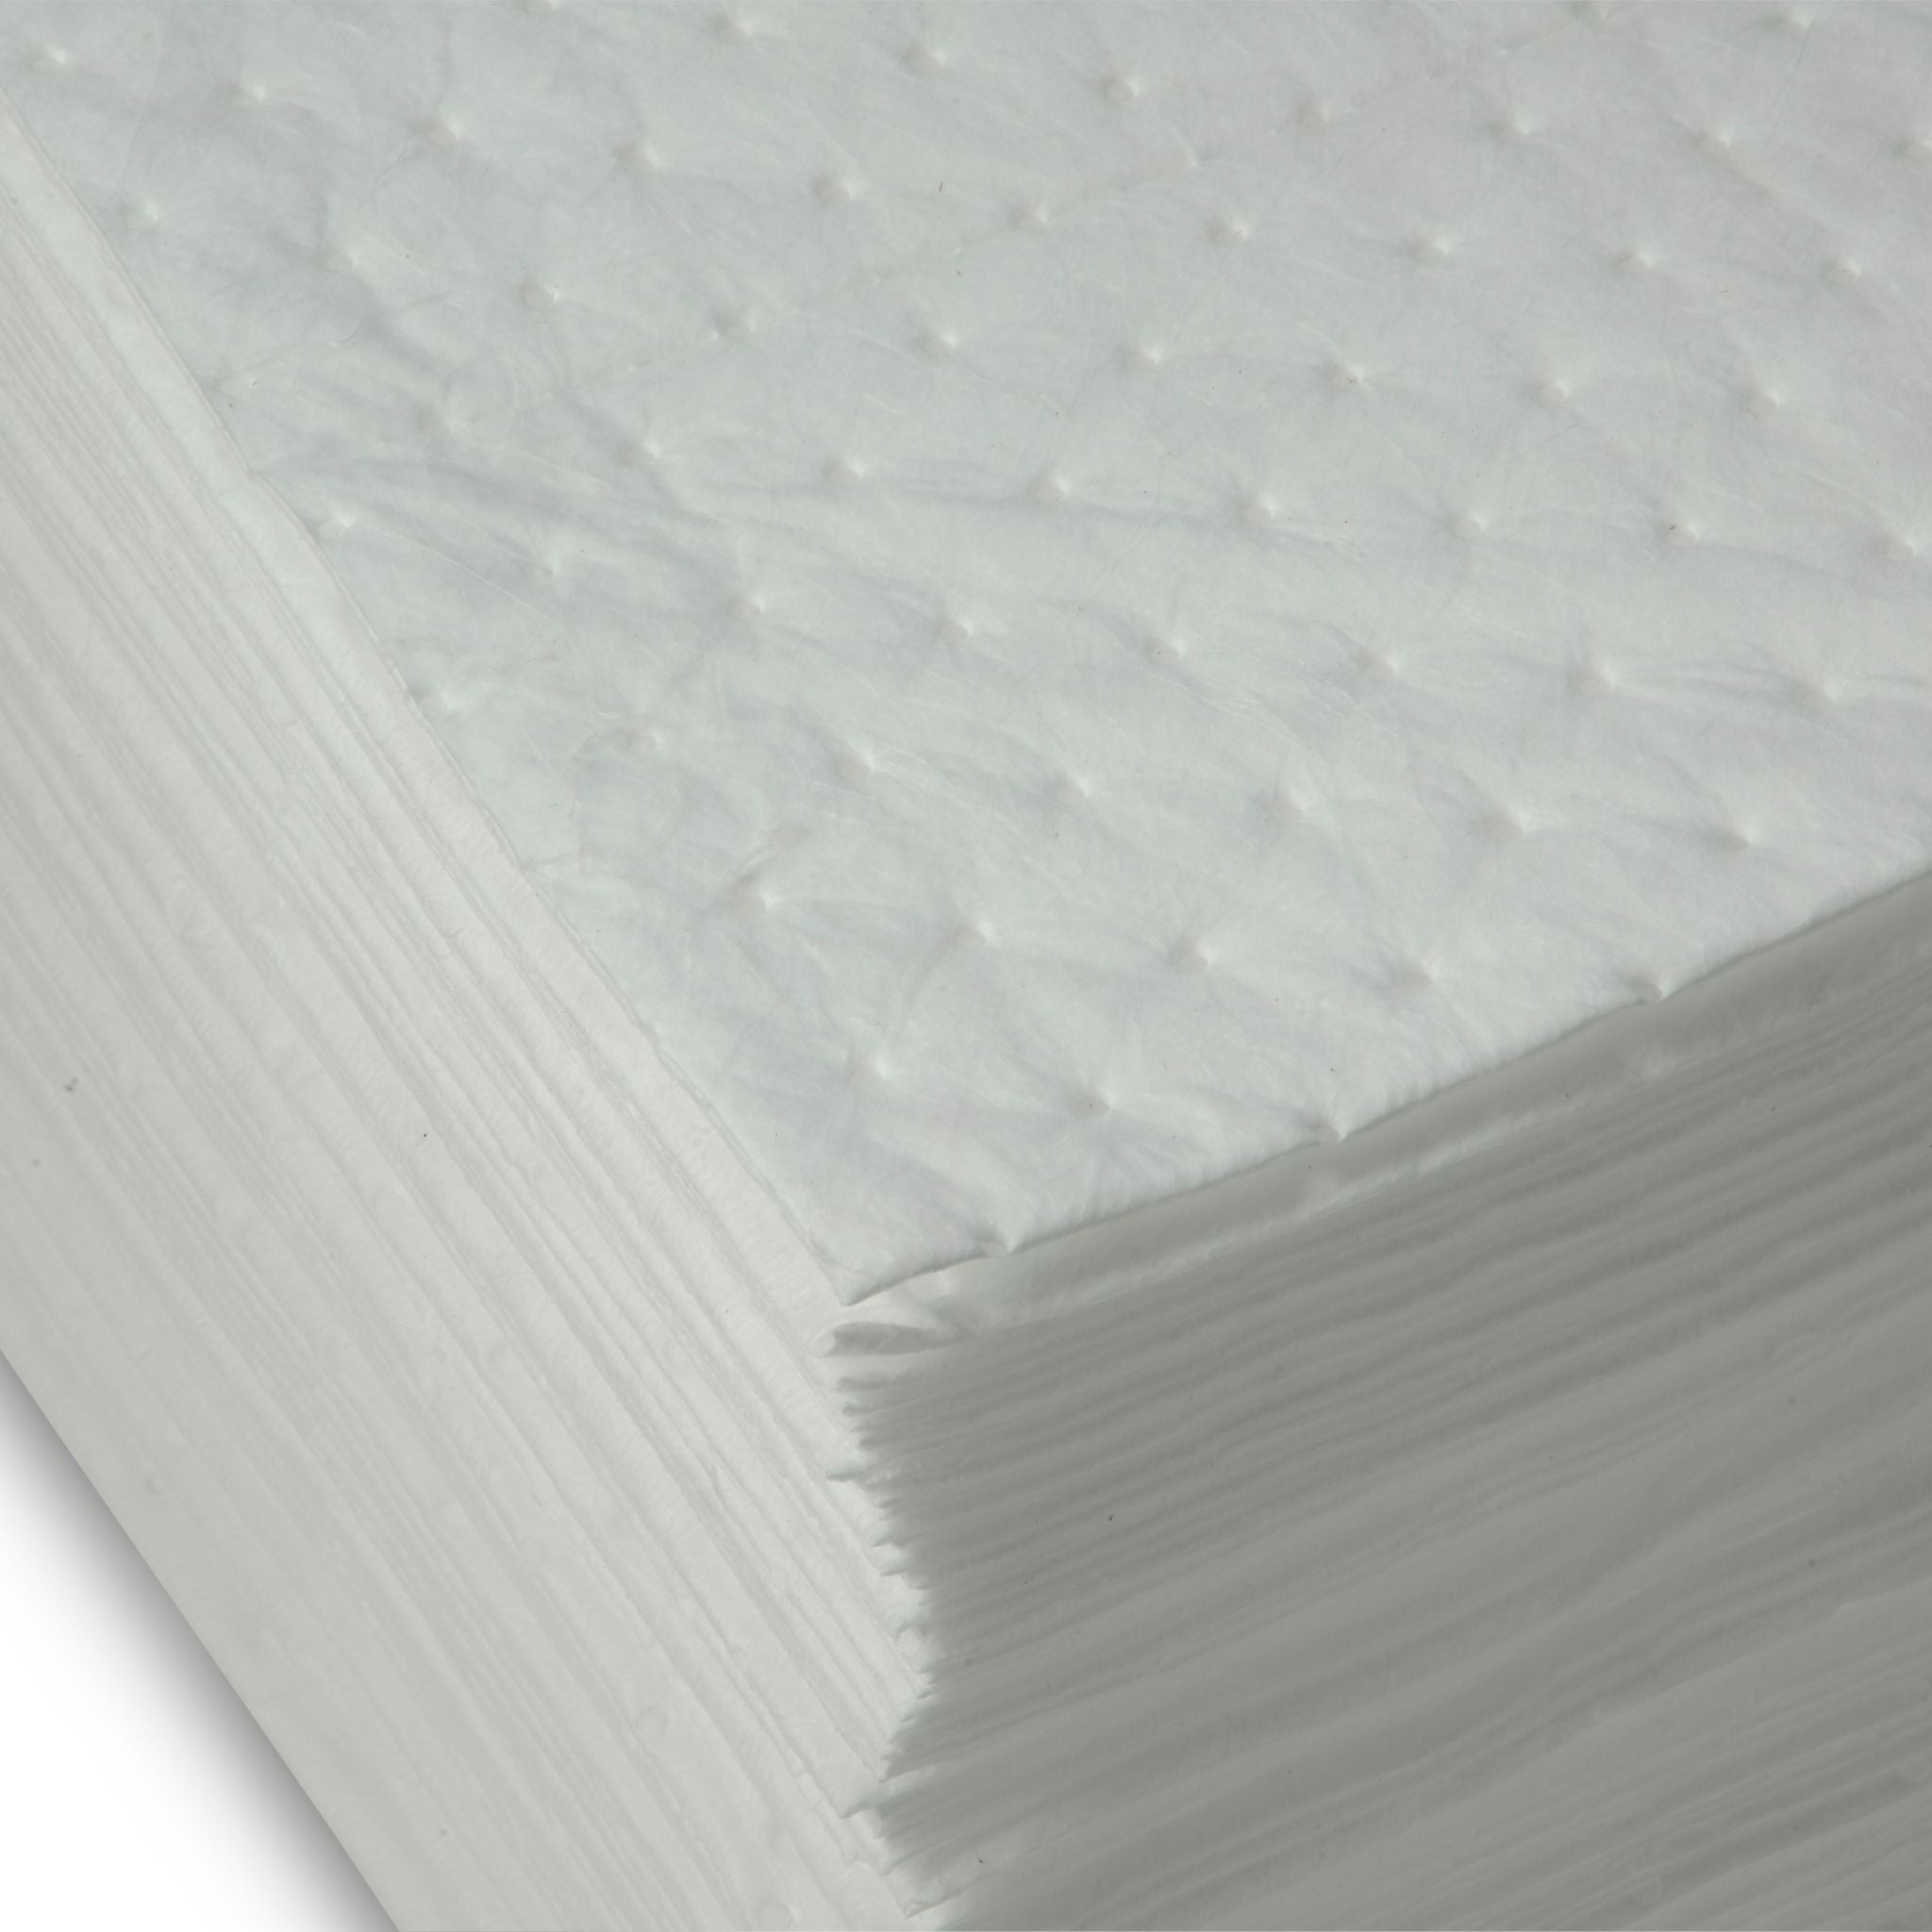 AABACO Oil ONLY White Absorbent Pads - Dimpled MEDIUM Weight Pads – 15”x 18” (100/bale)